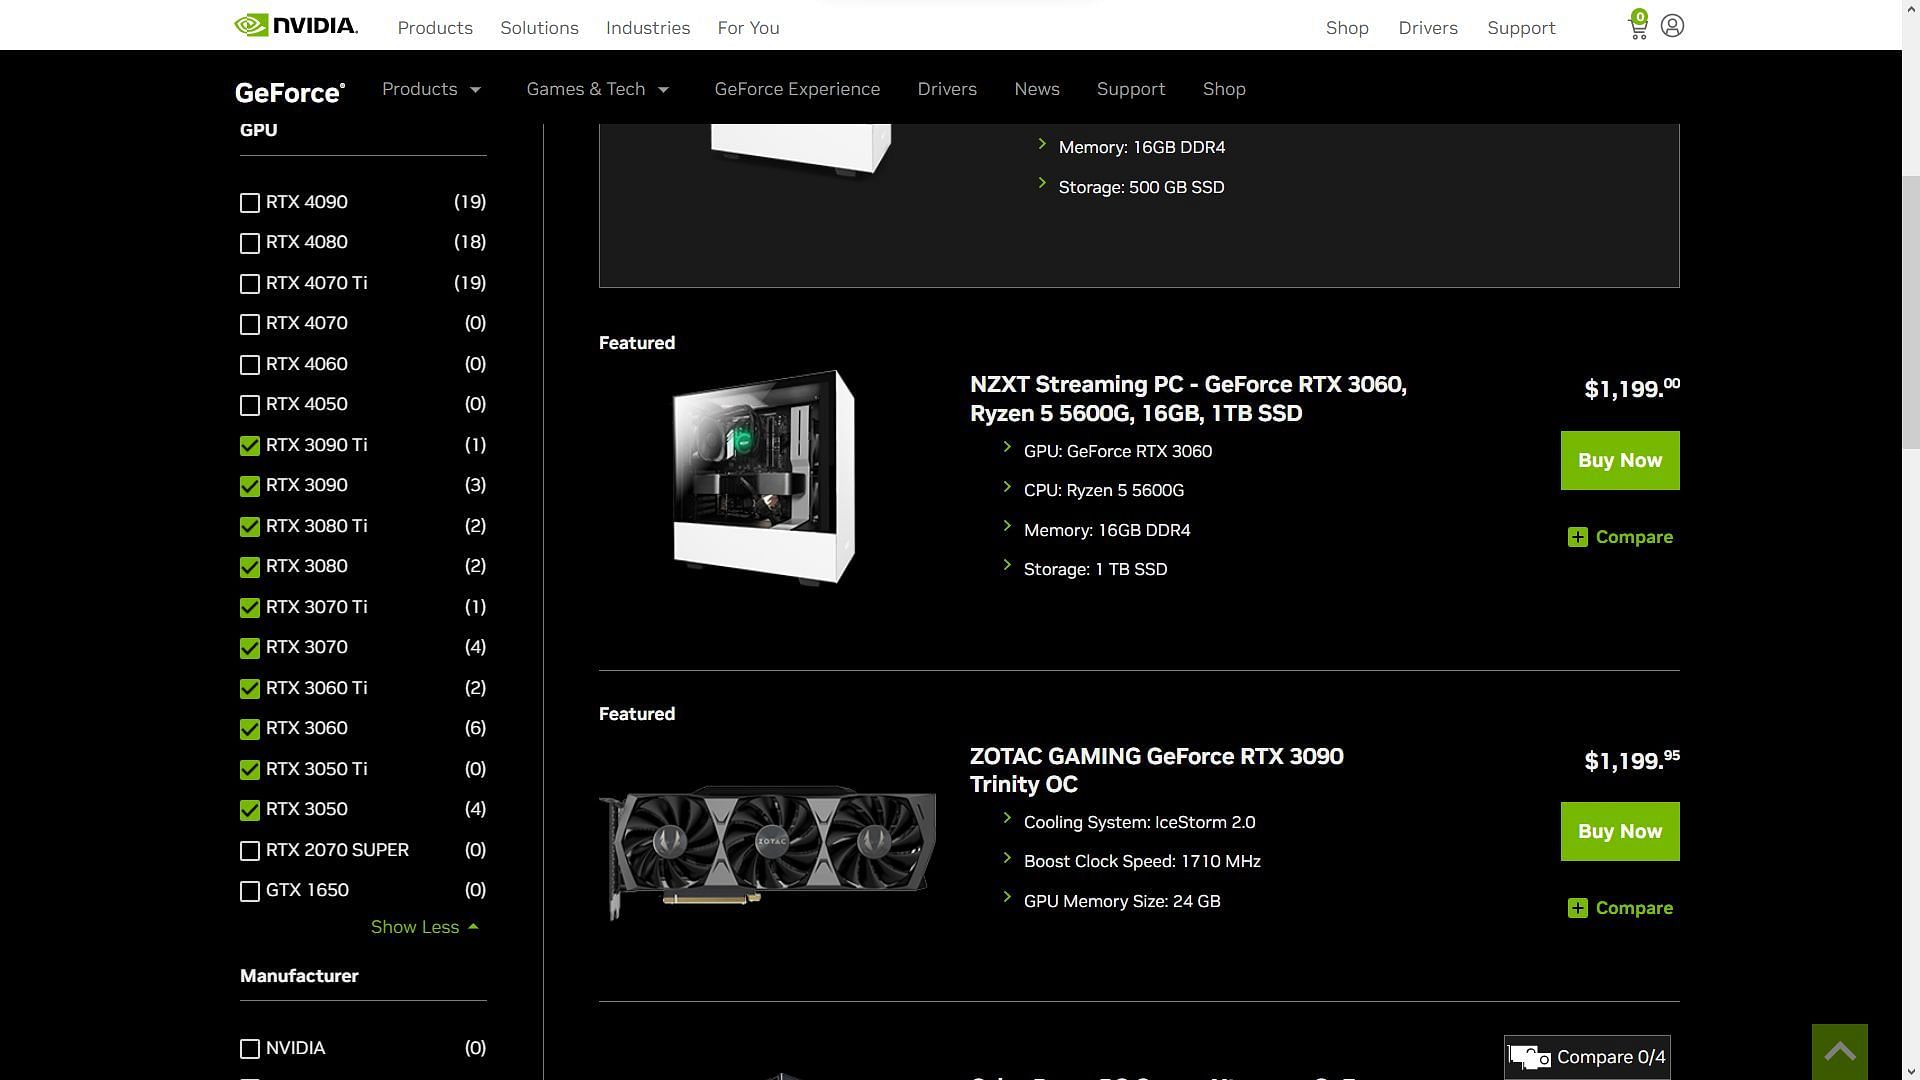 Nvidia&#039;s official website shows just pre-built PCs and add-in card models (Image via Nvidia)